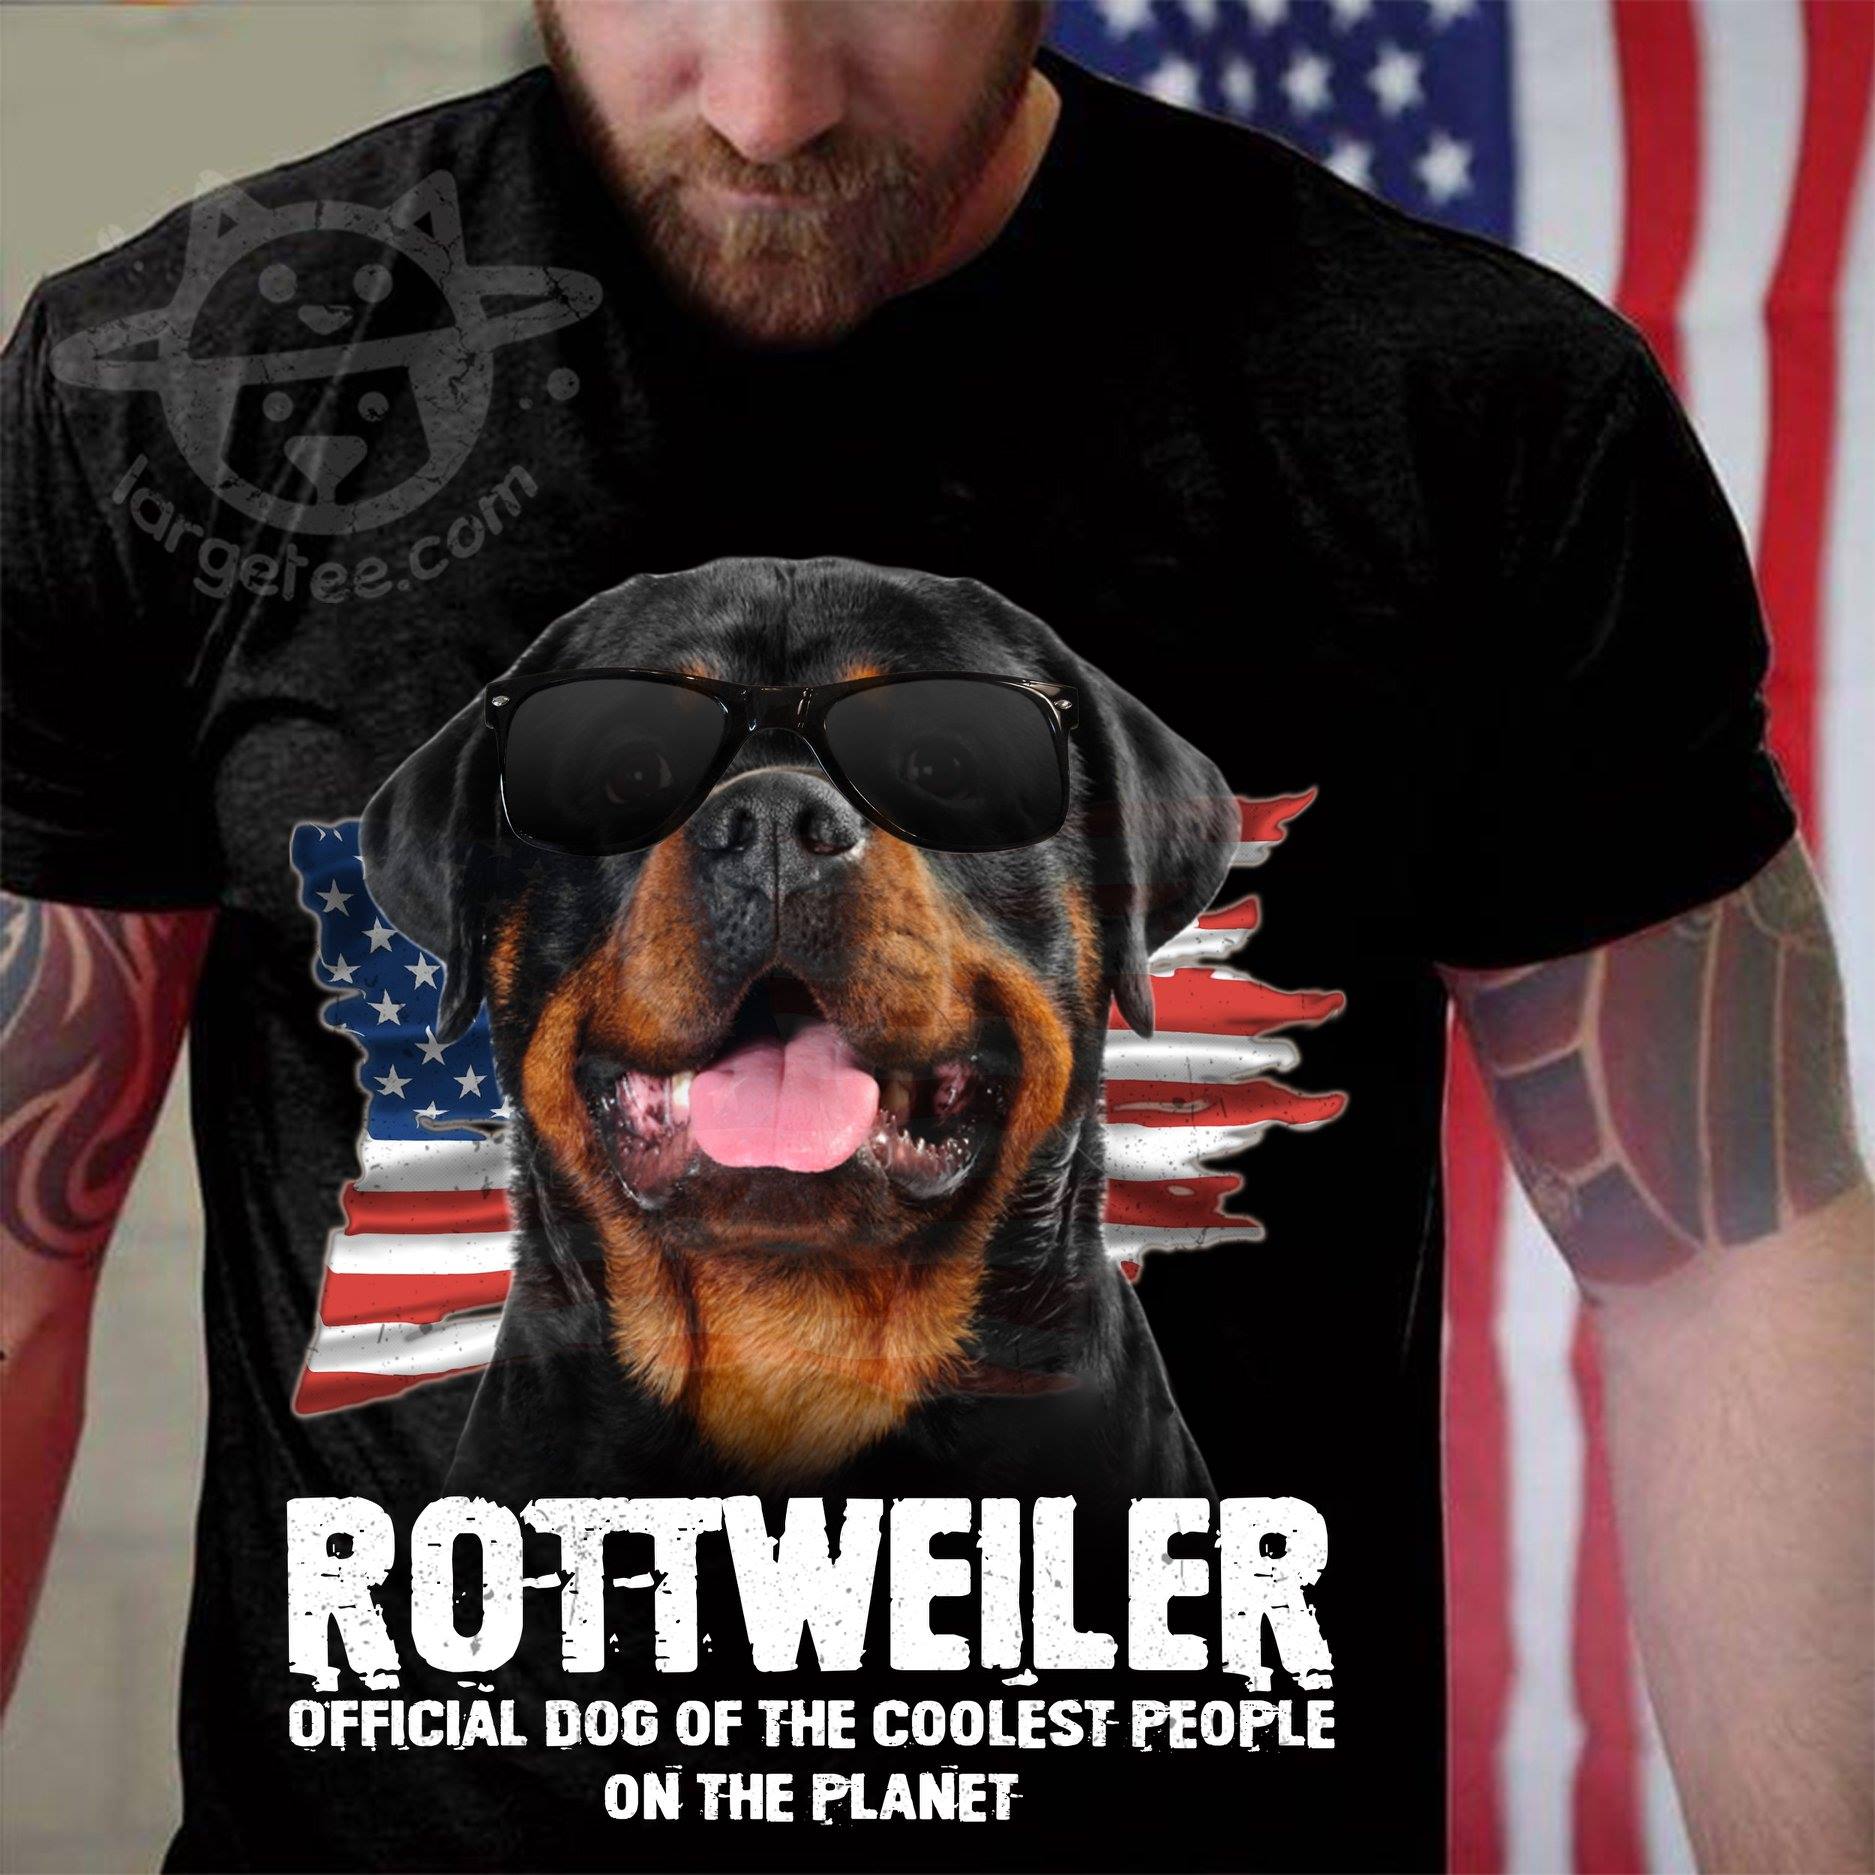 Rottweiler official dog of the coolest people on the planet - America flag